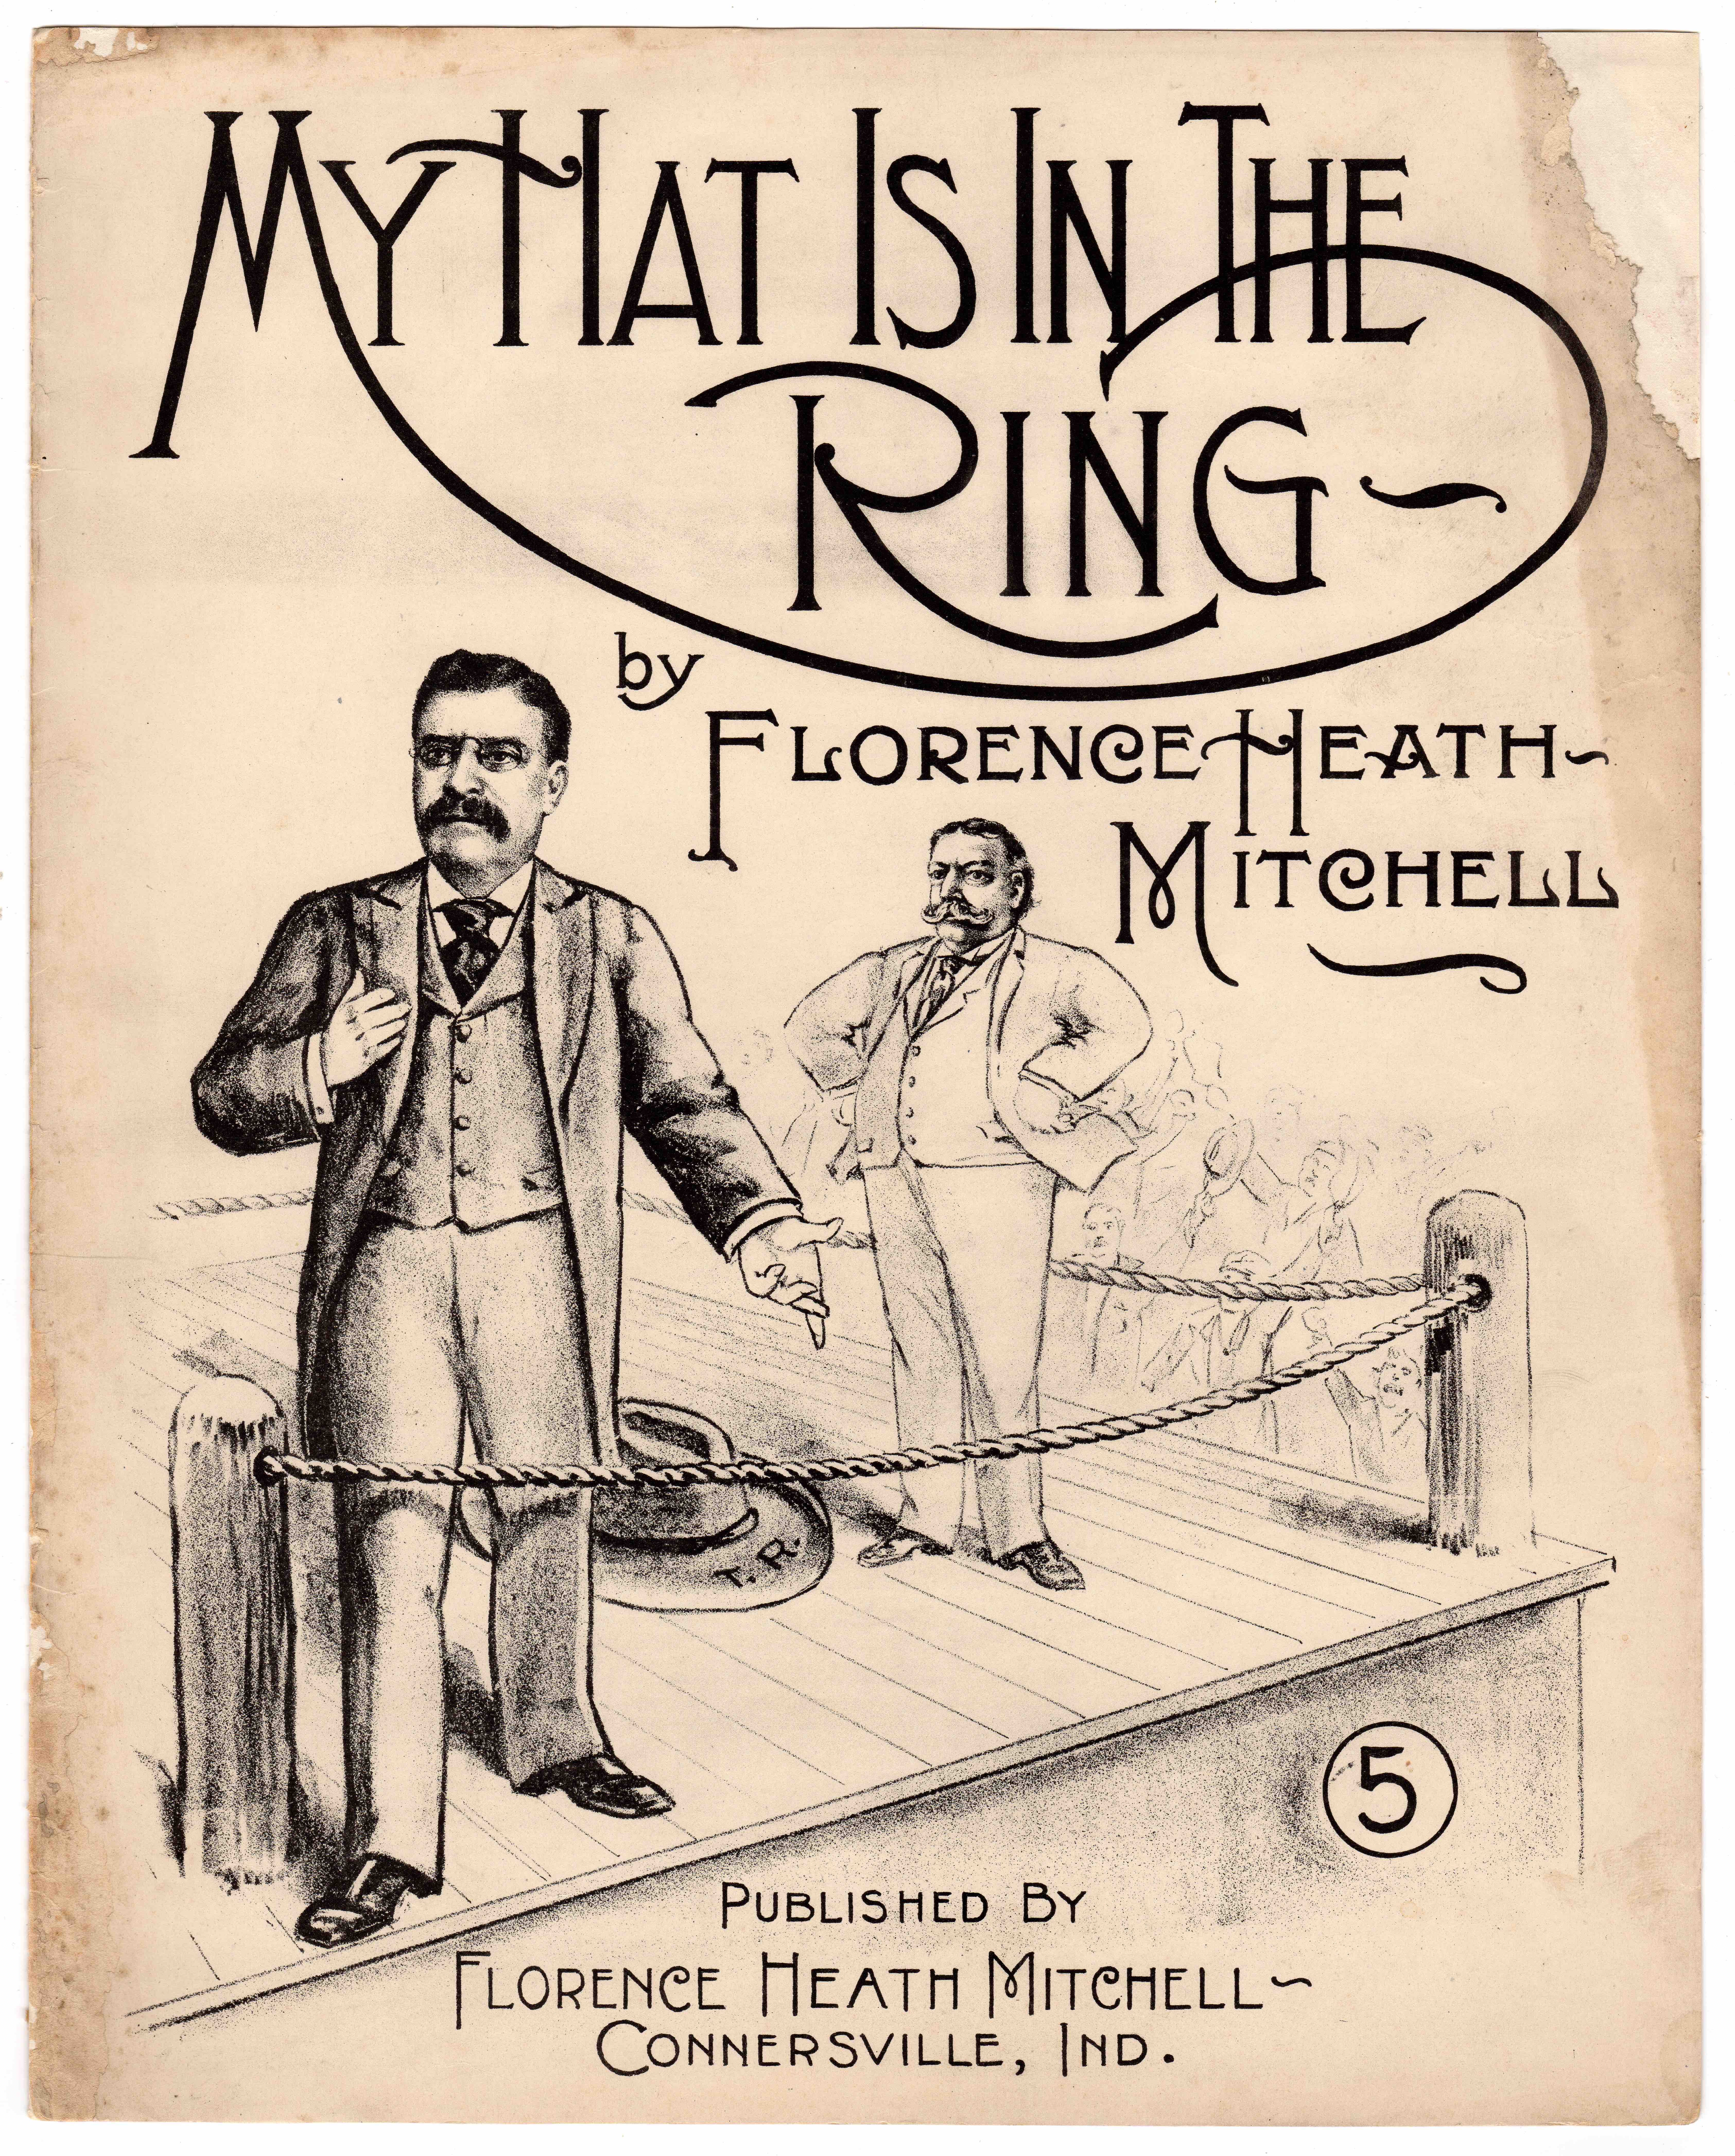 The cover of sheet music for "My Hat is in the Ring," a song about Roosevelt's entry into the election.